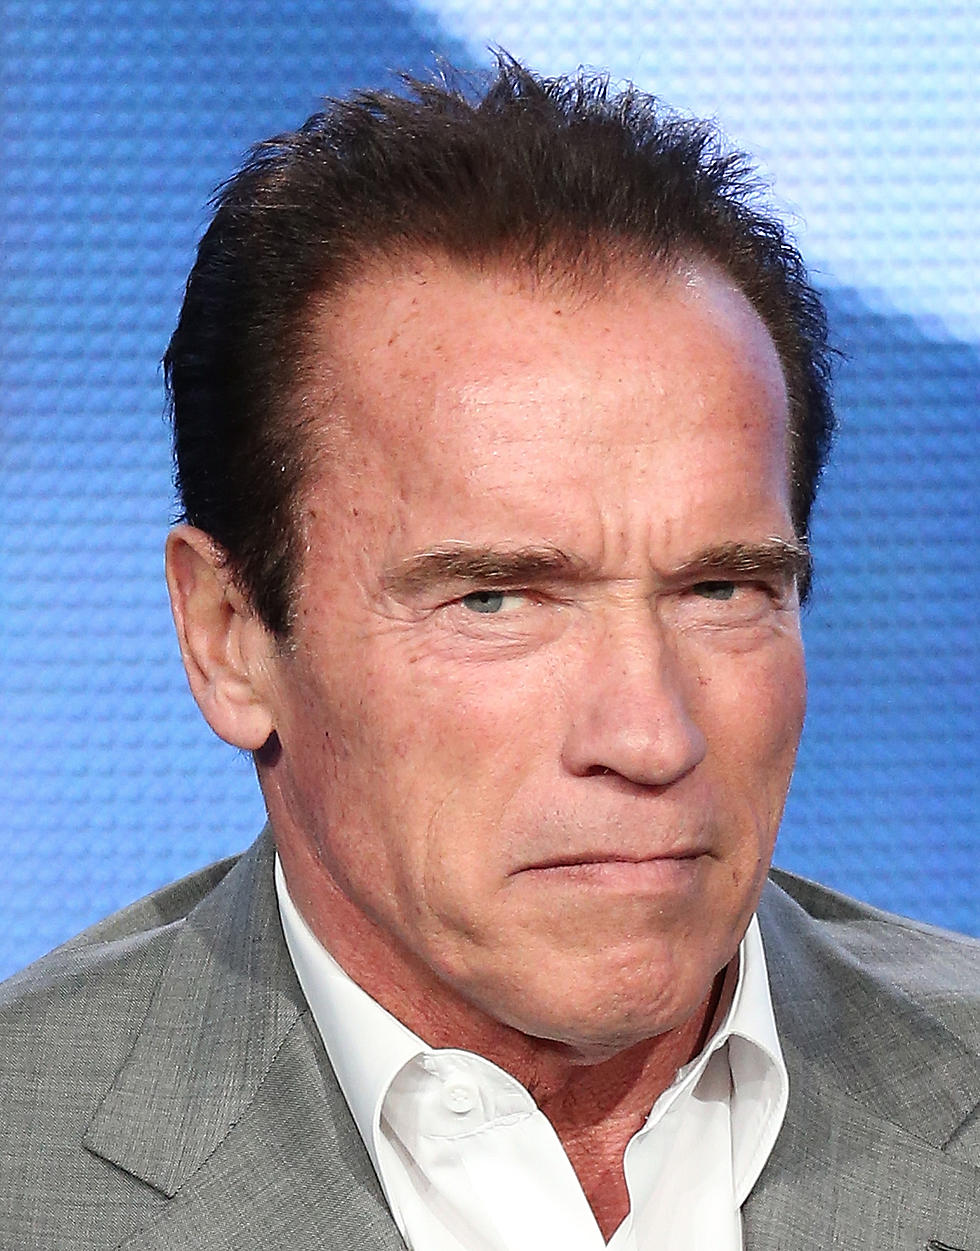 Arnold Schwarzenegger Acts Out All of His Films in 6 Minutes, and it’s Awesome [Video]